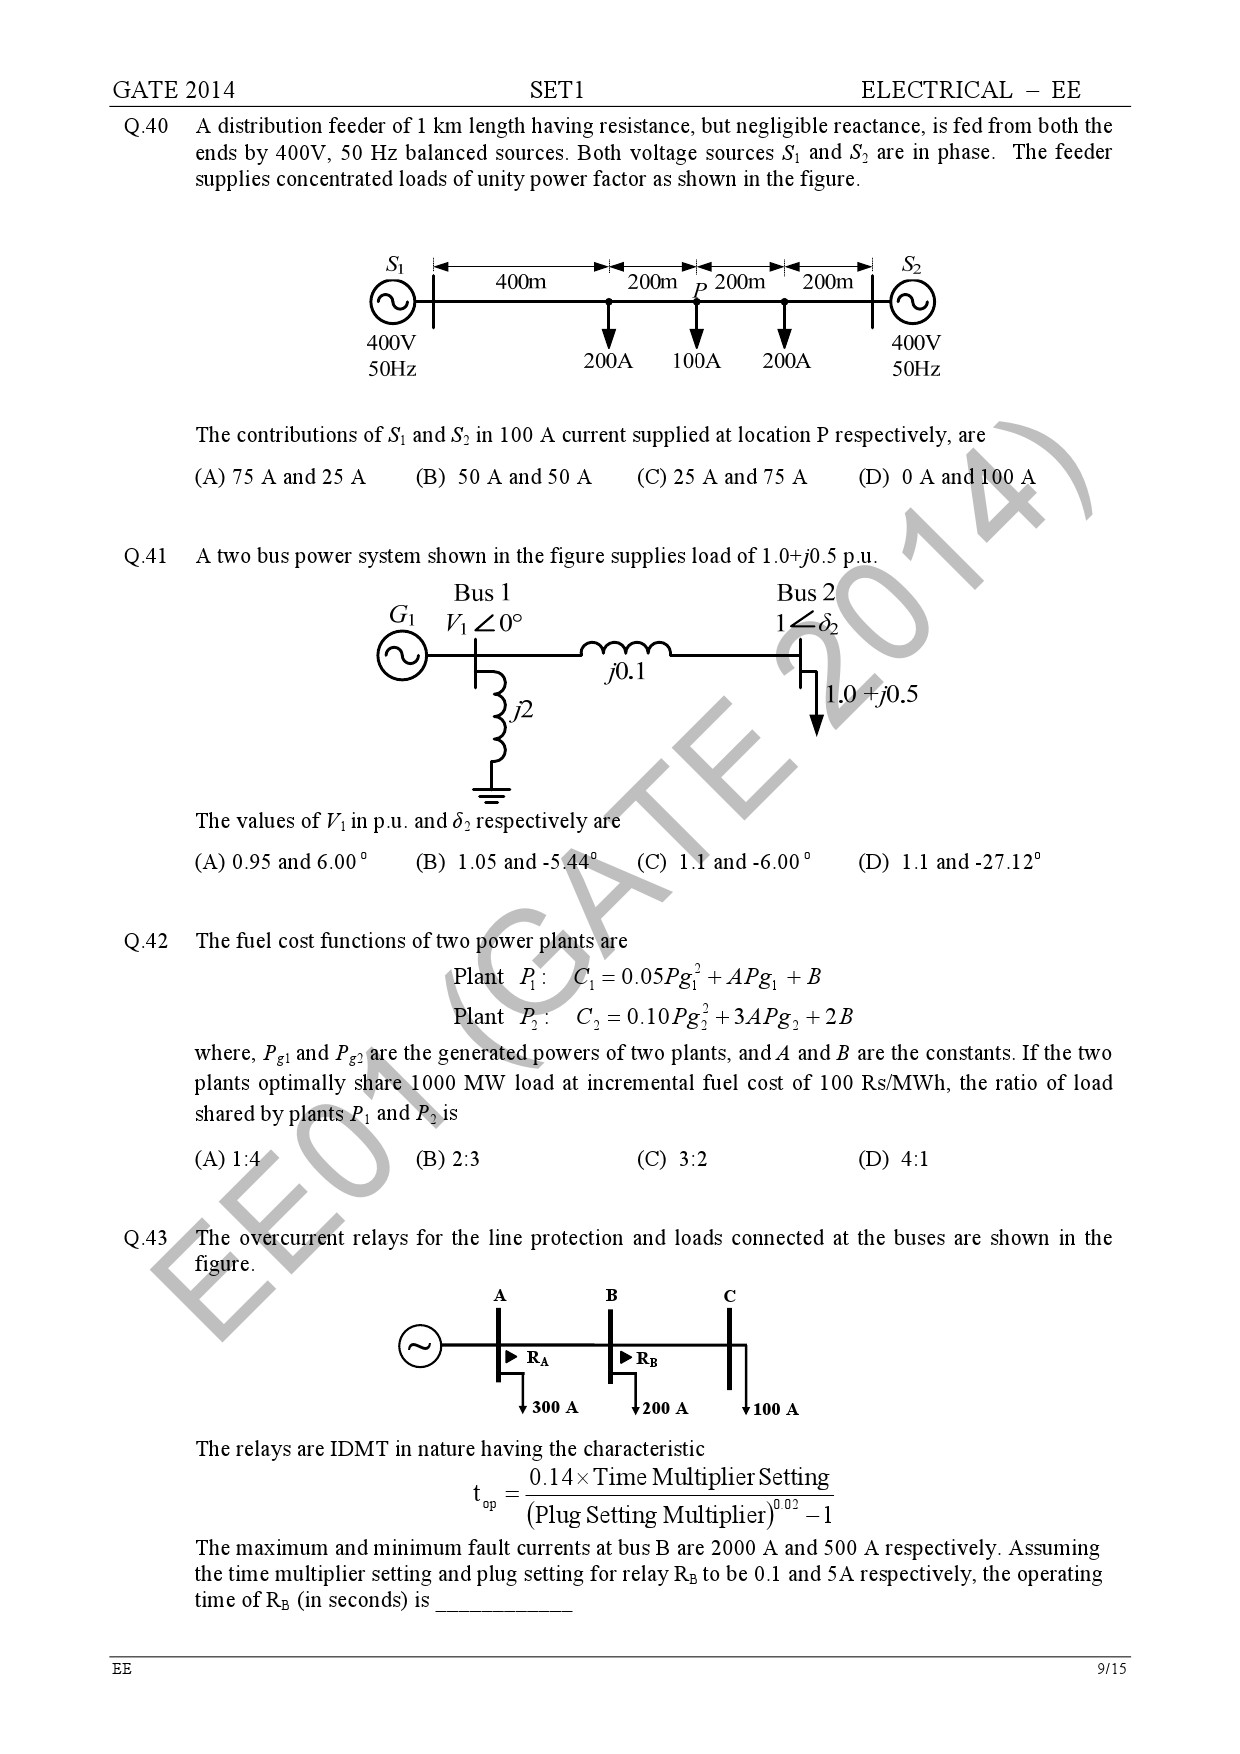 GATE Exam Question Paper 2014 Electrical Engineering Set 1 15